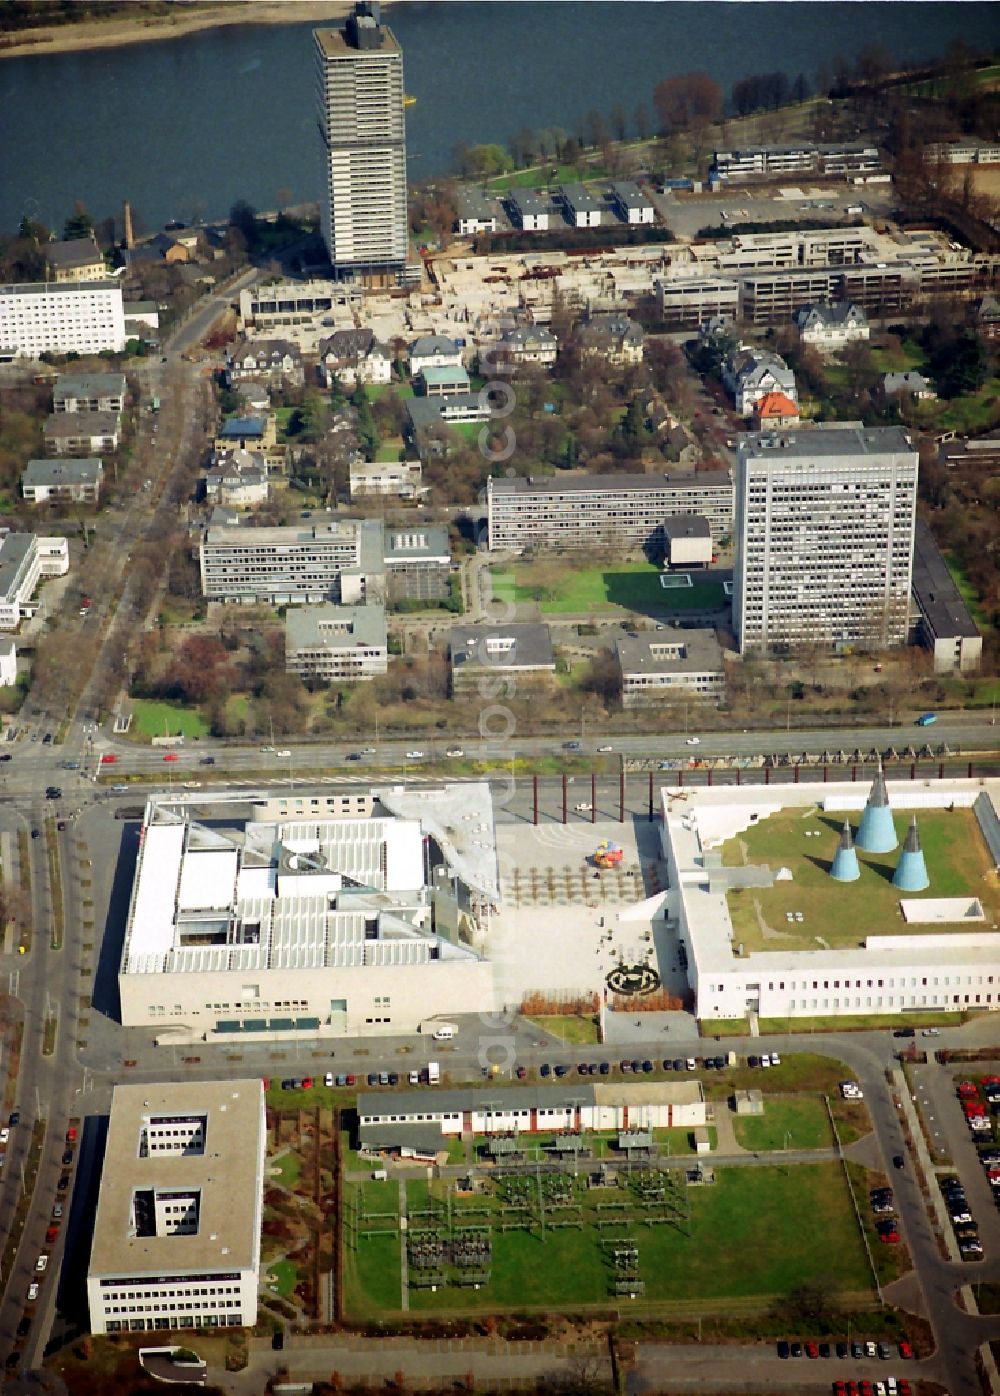 Aerial image Bonn - Museum and building ensemble of the Kunstmuseum Bonn and the Bundeskunsthalle at the Friedrich-Ebert-Allee in Bonn in the state of North Rhine-Westphalia, Germany